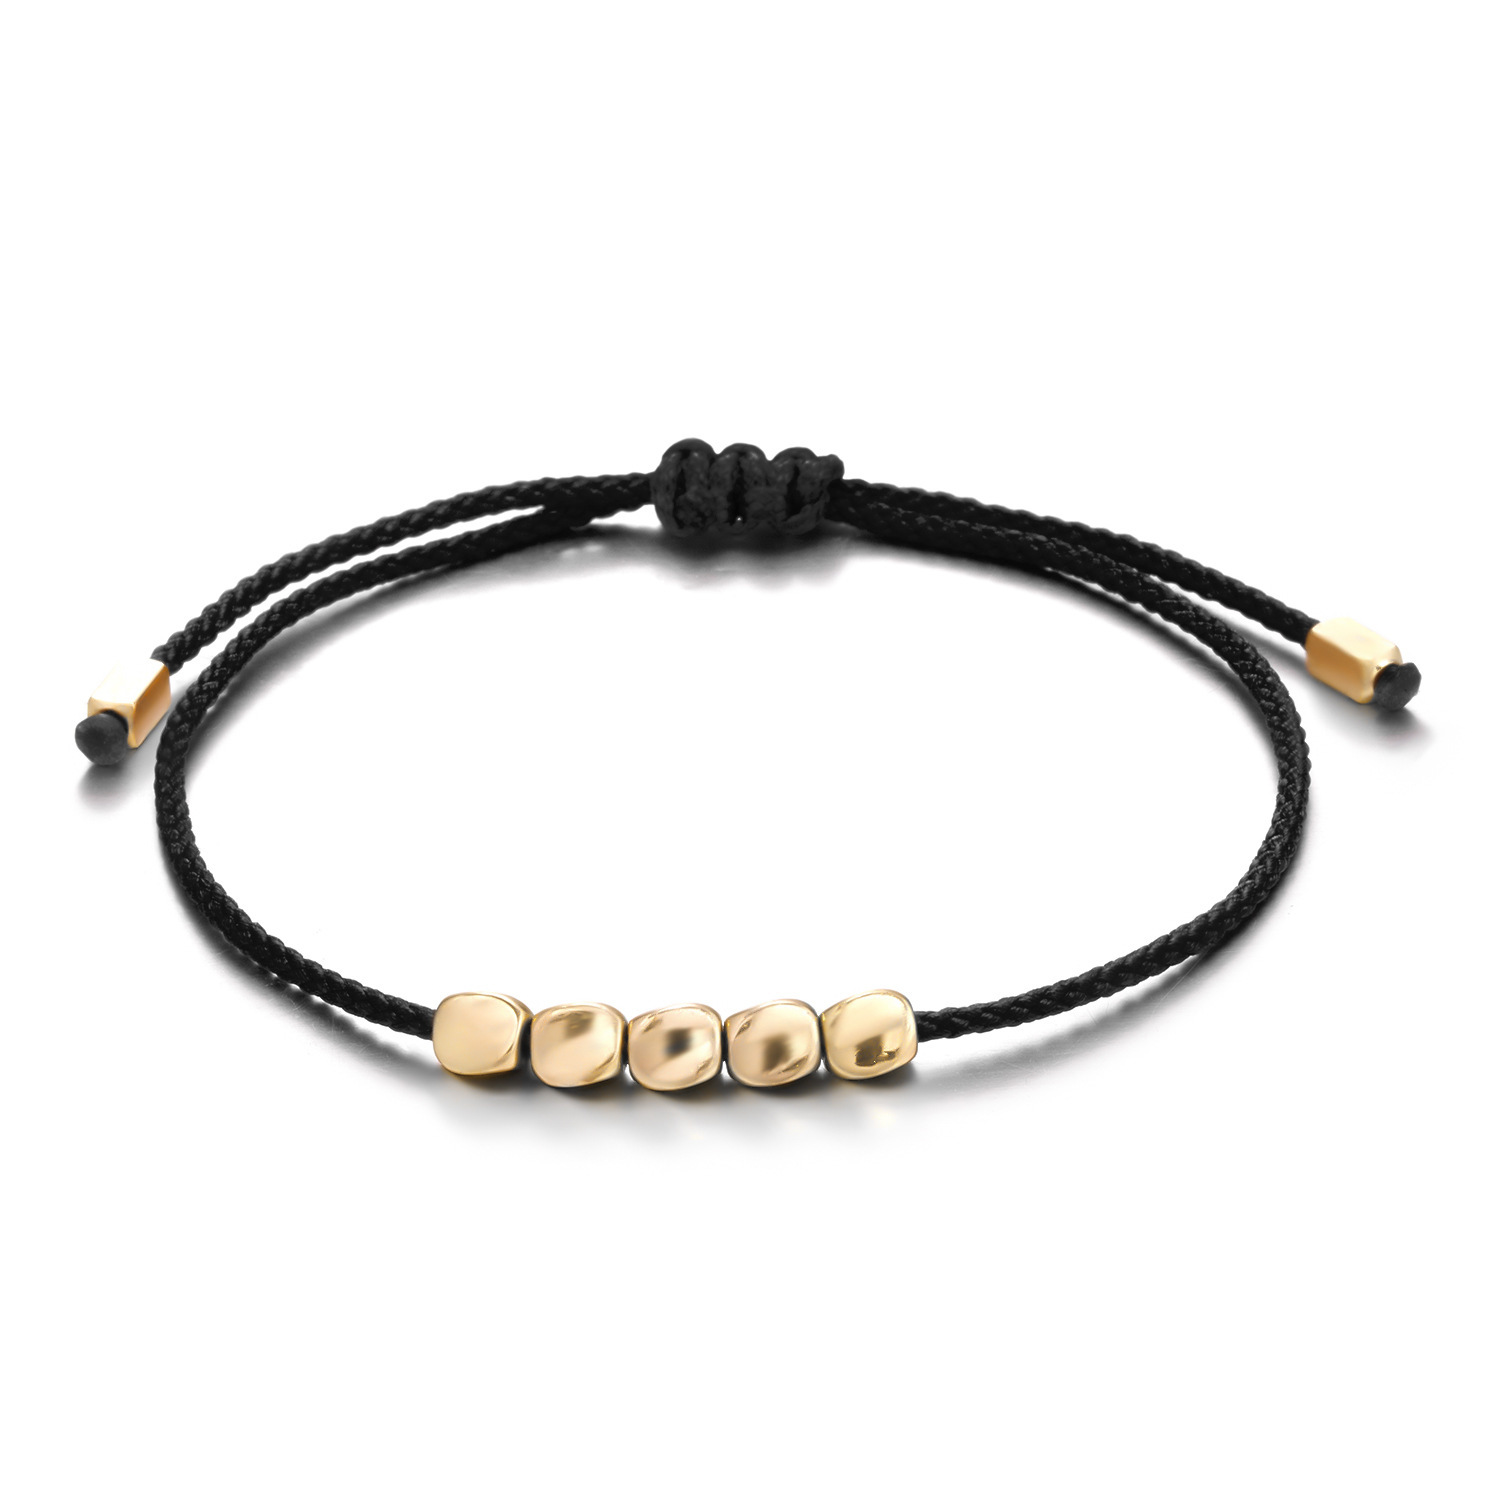 5:5 black strings with copper beads